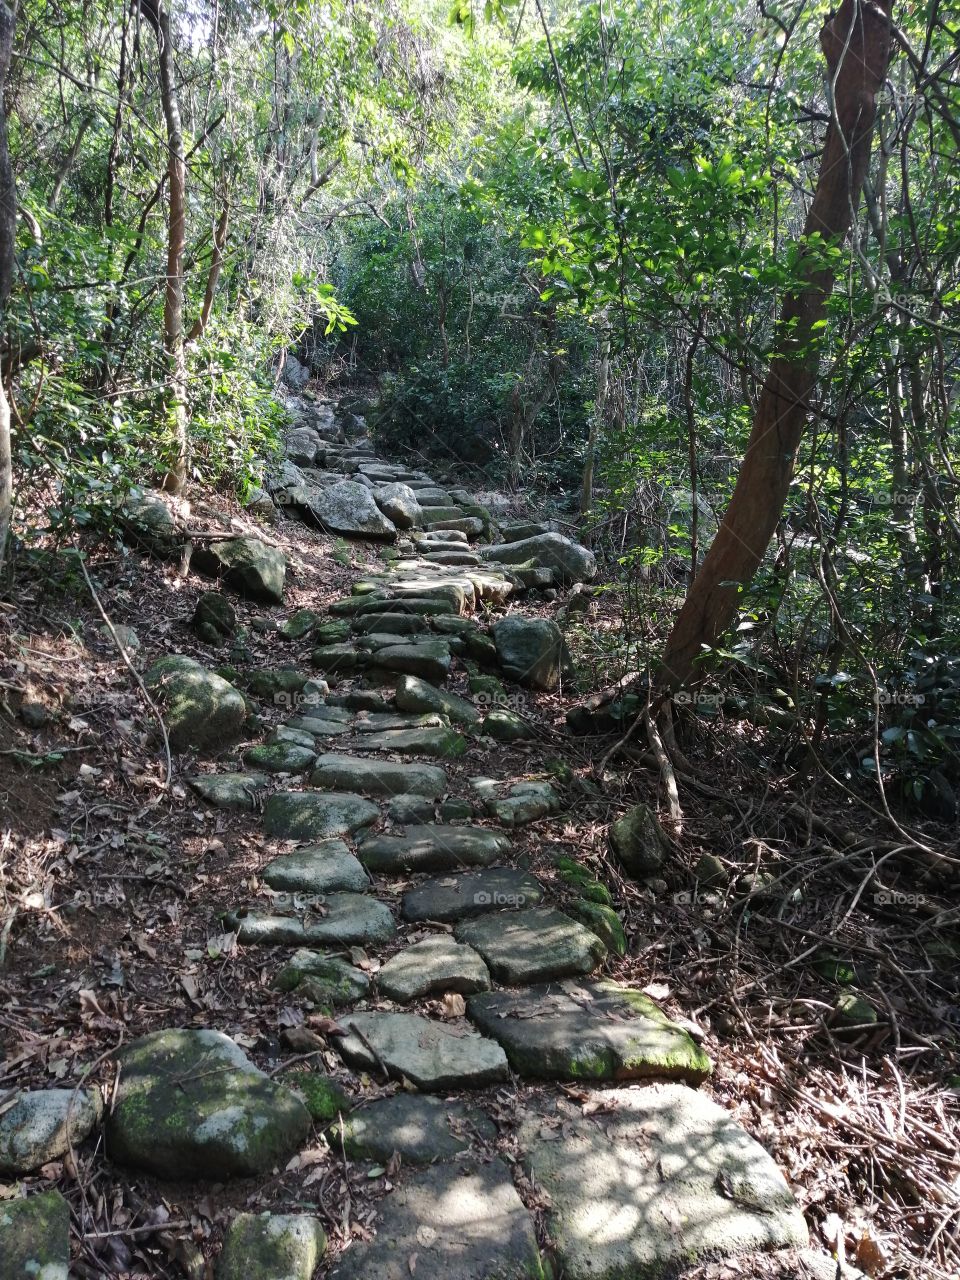 An ancient and mysterious path up a wooded mountain. Sacred peace and beauty to cleanse the soul.